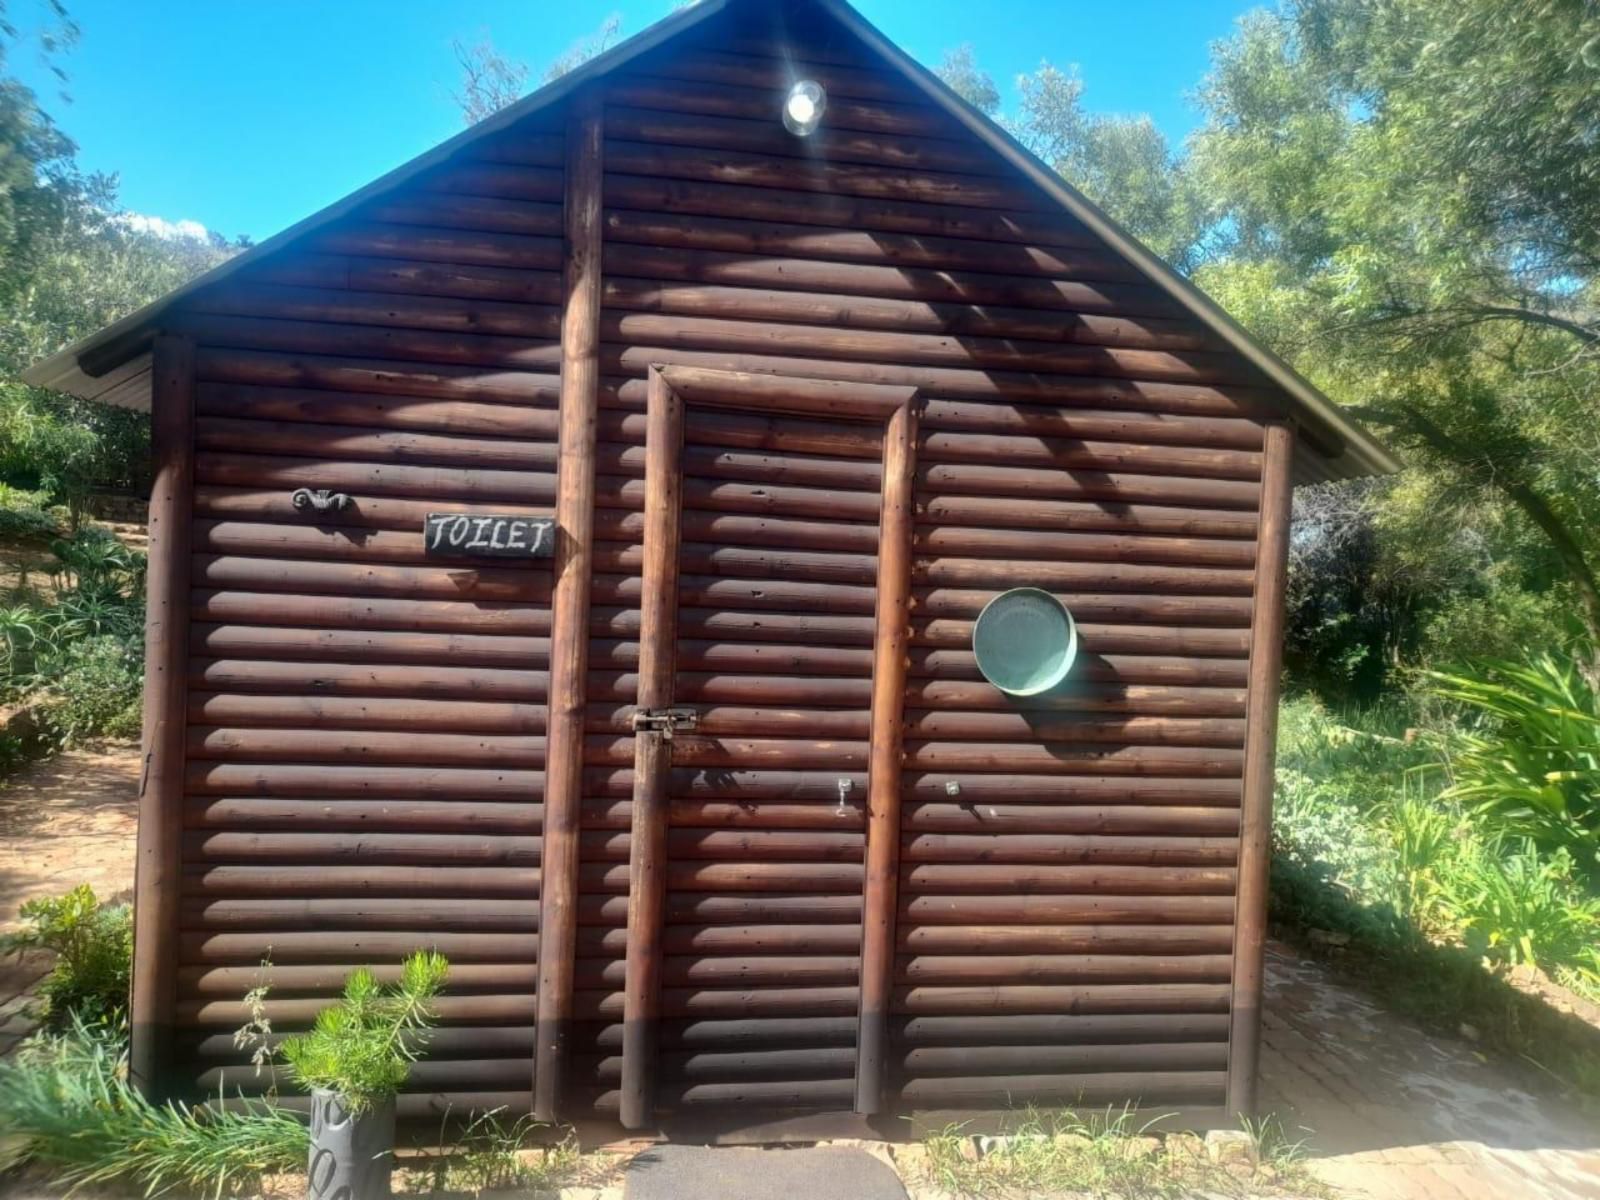 Houtbosdorp Broederstroom Hartbeespoort North West Province South Africa Building, Architecture, Cabin